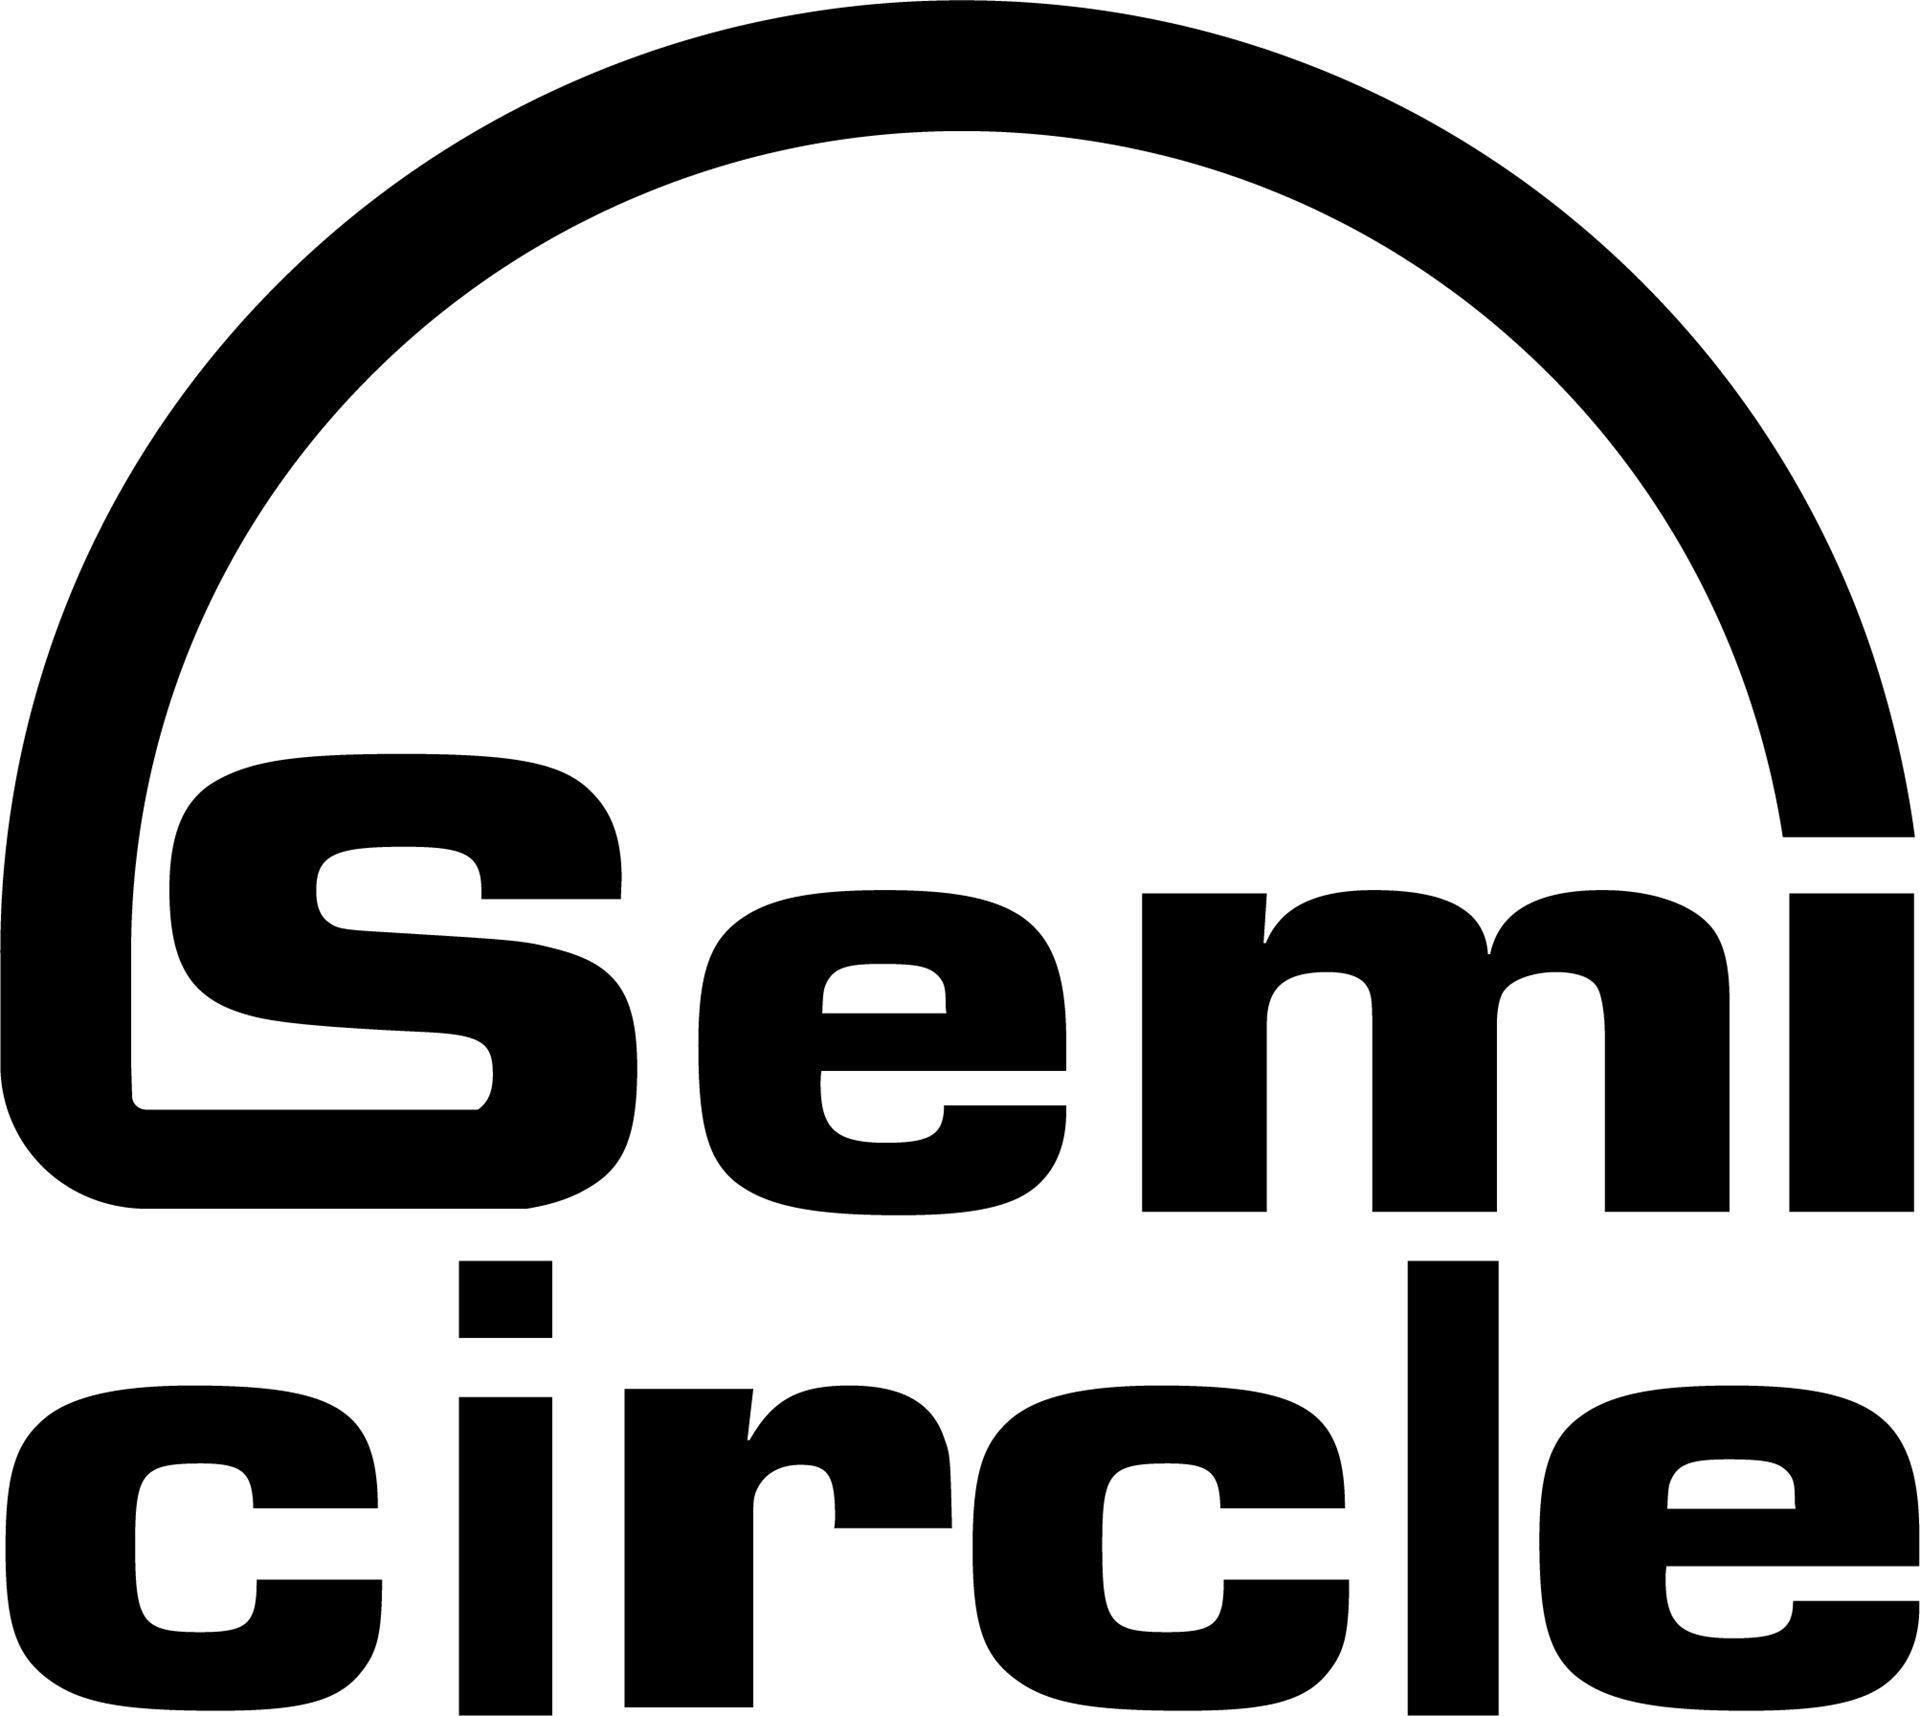 Semicircle with Black and White Logo - The Semi Circle Basel